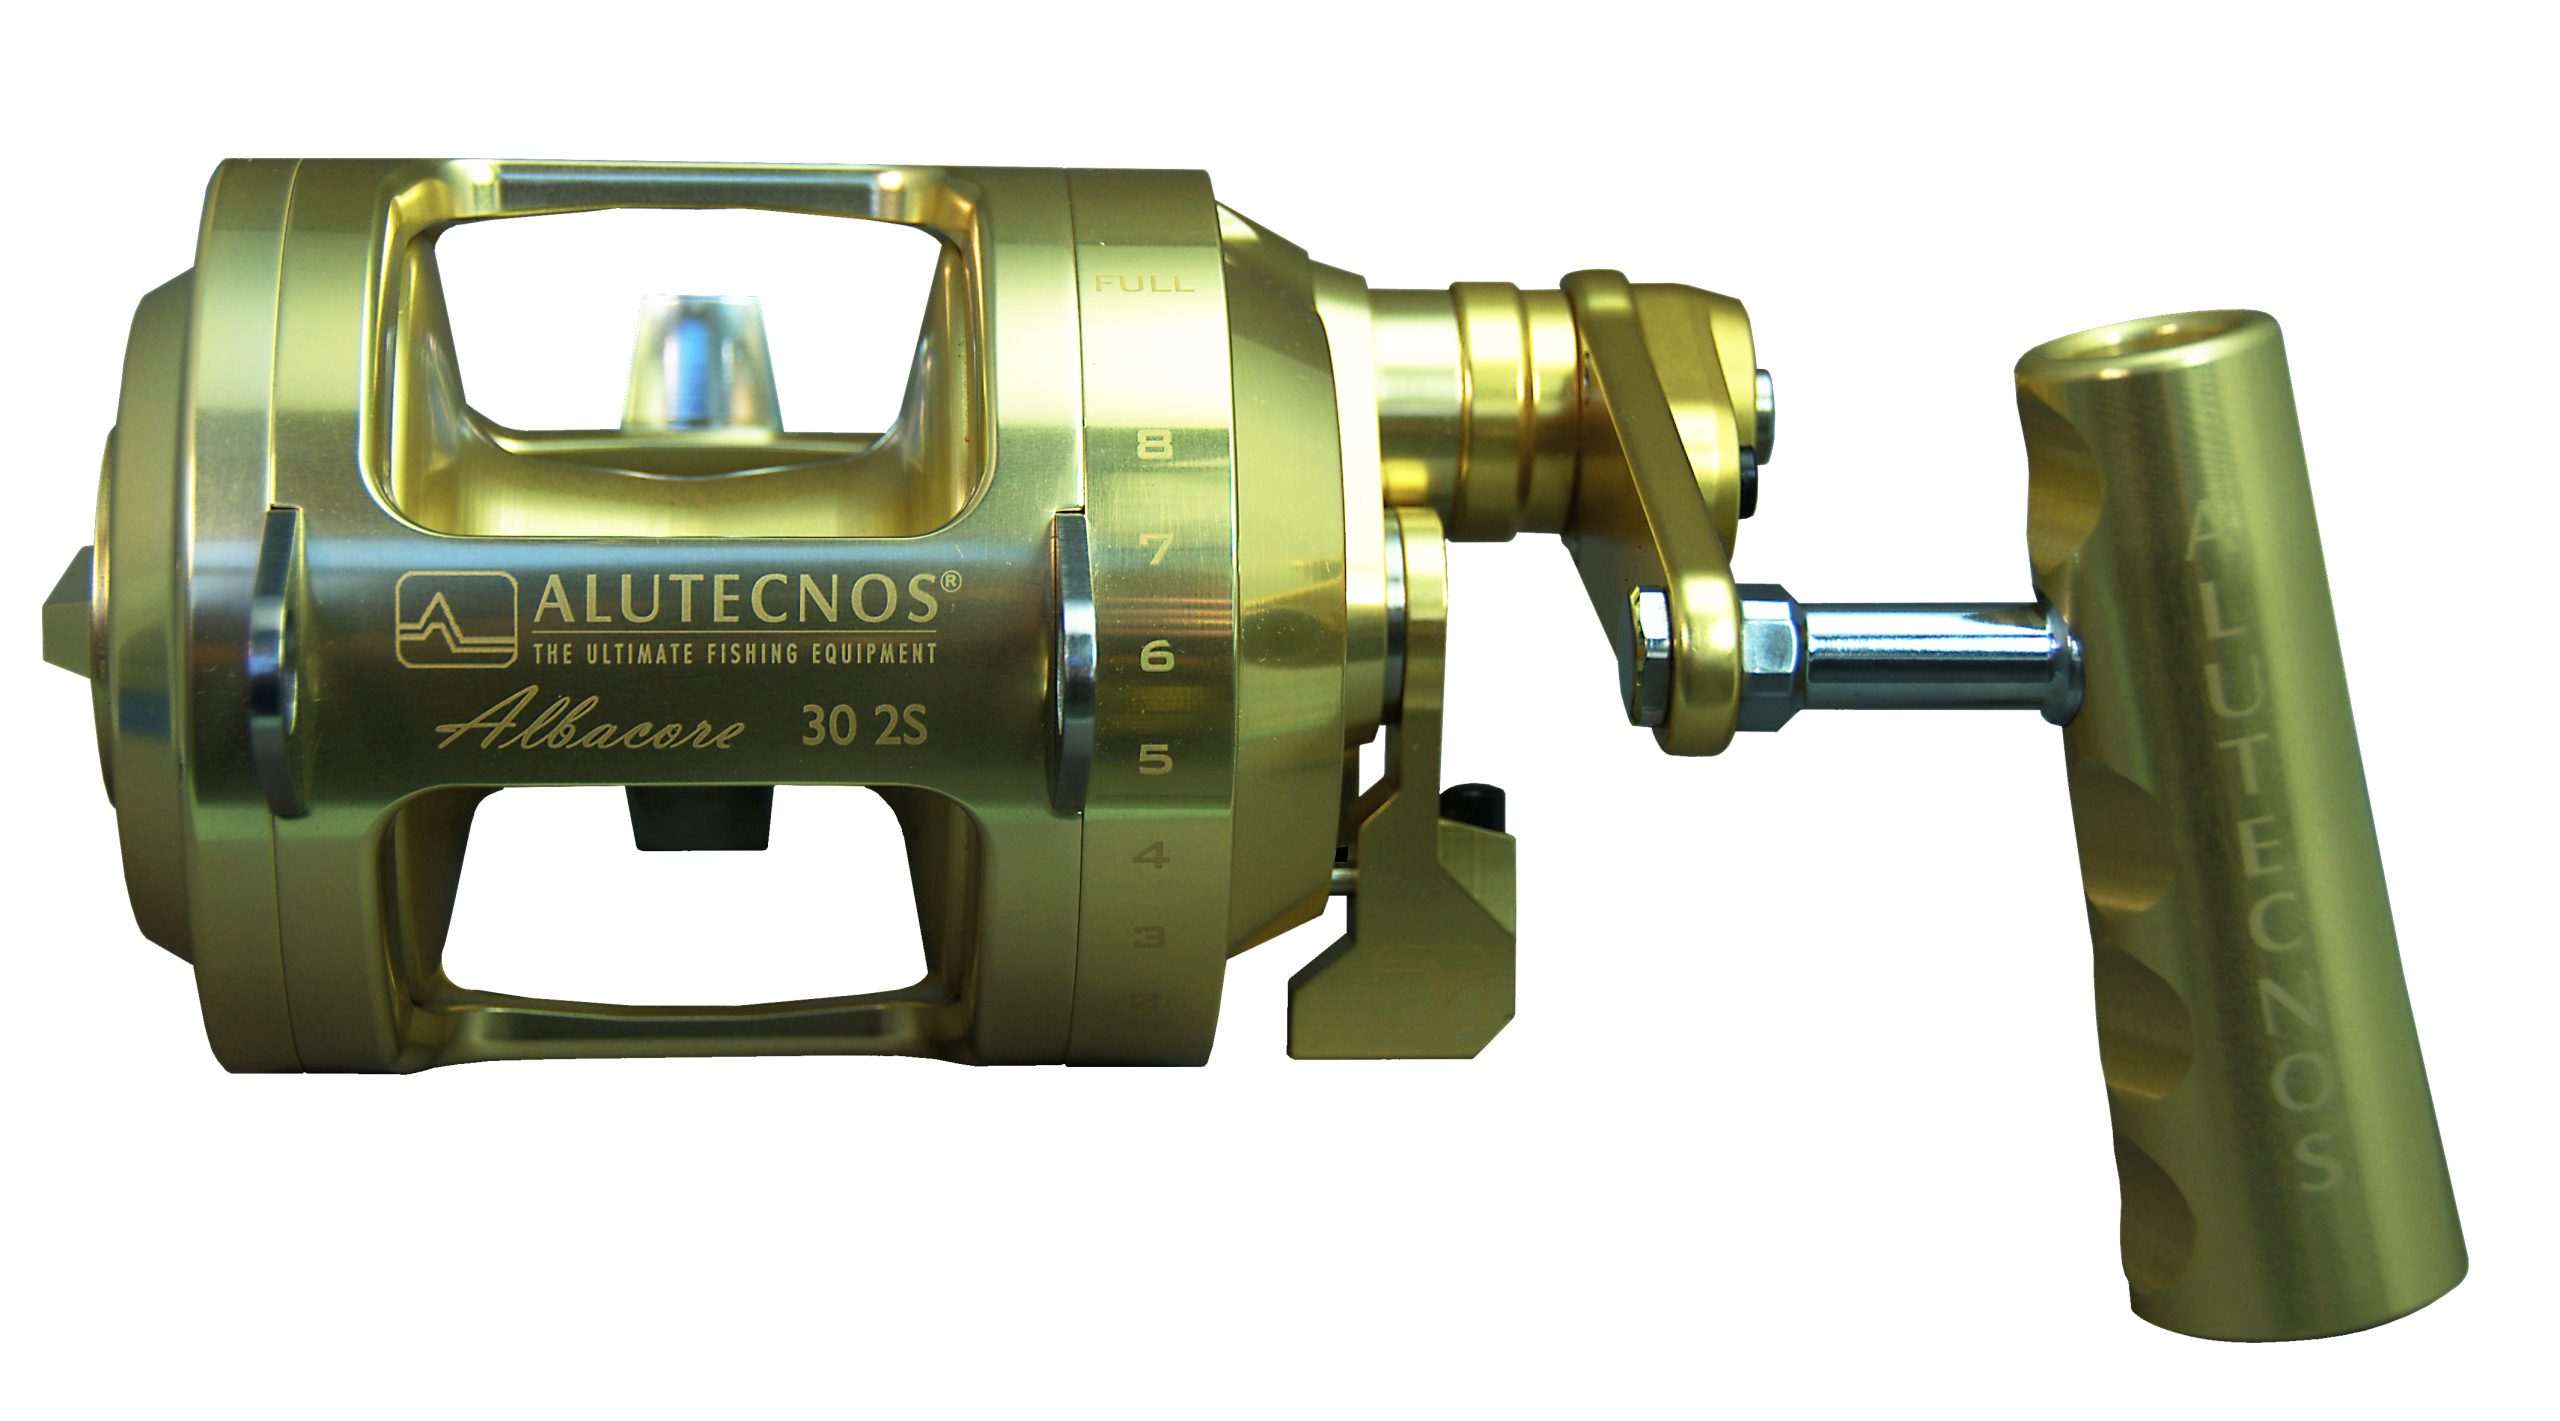 Alutecnos Fishing Reels Archives - Fisherman's Outfitter